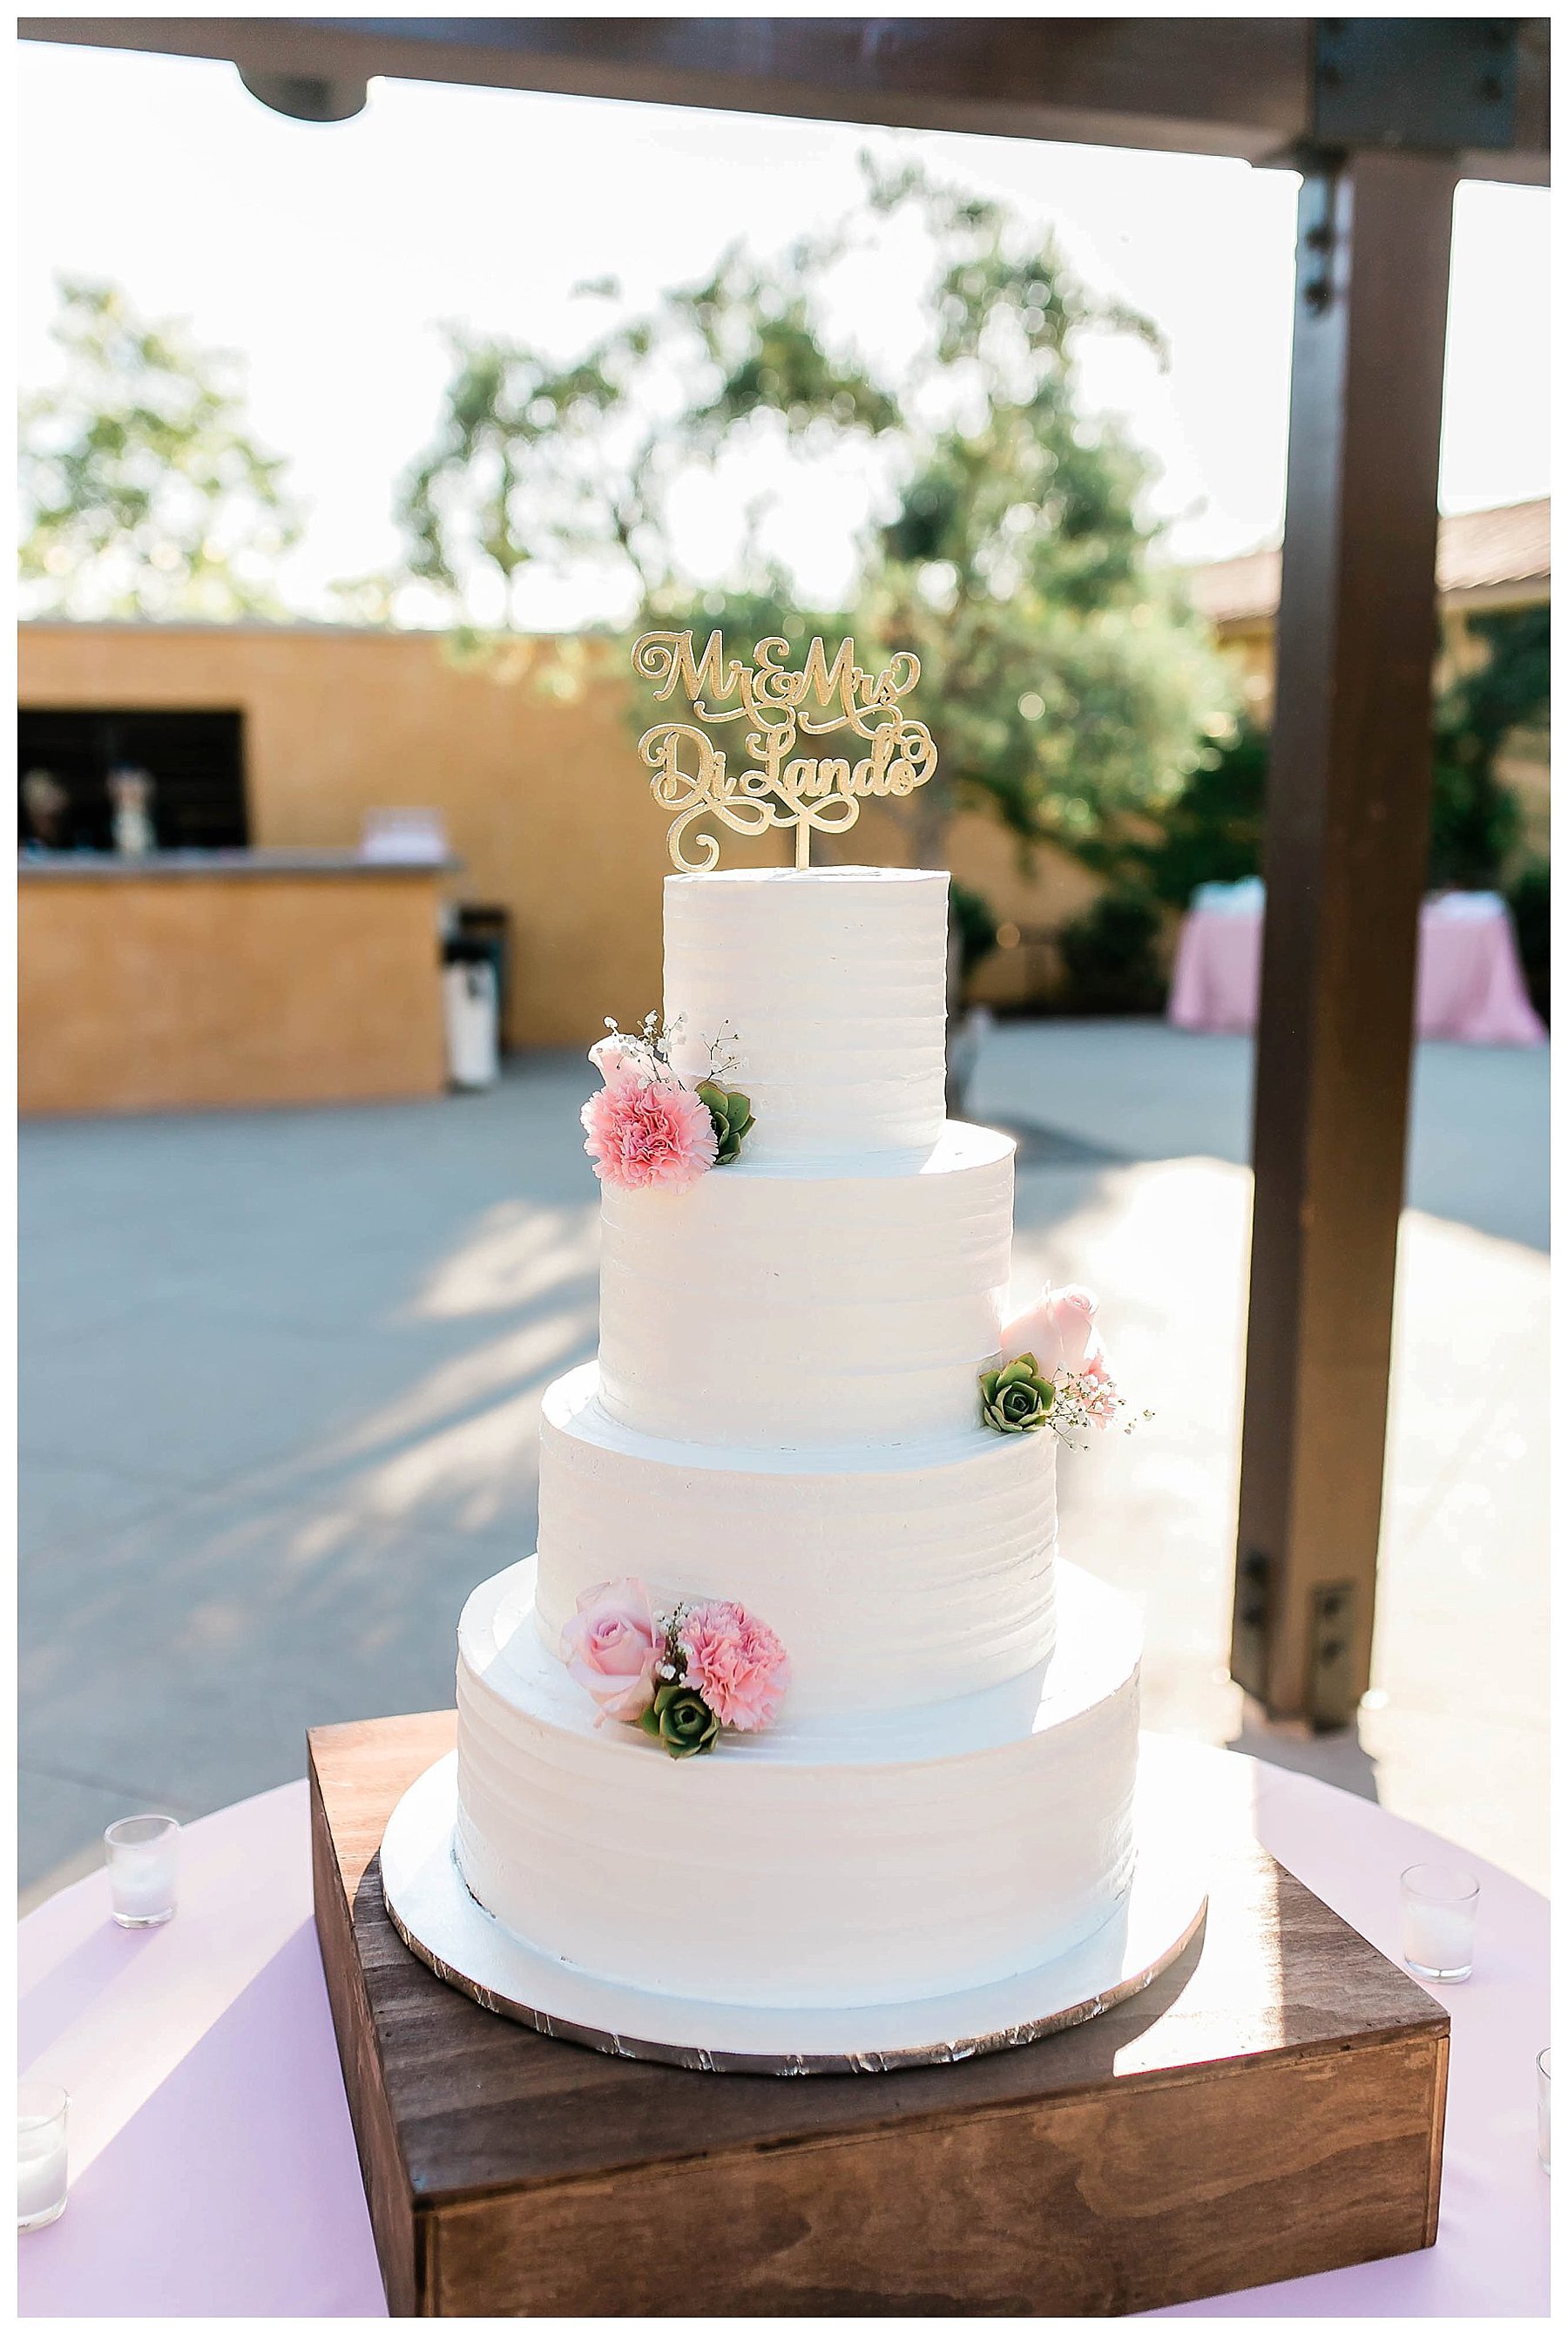  wedding cake with pink flowers on the cake 